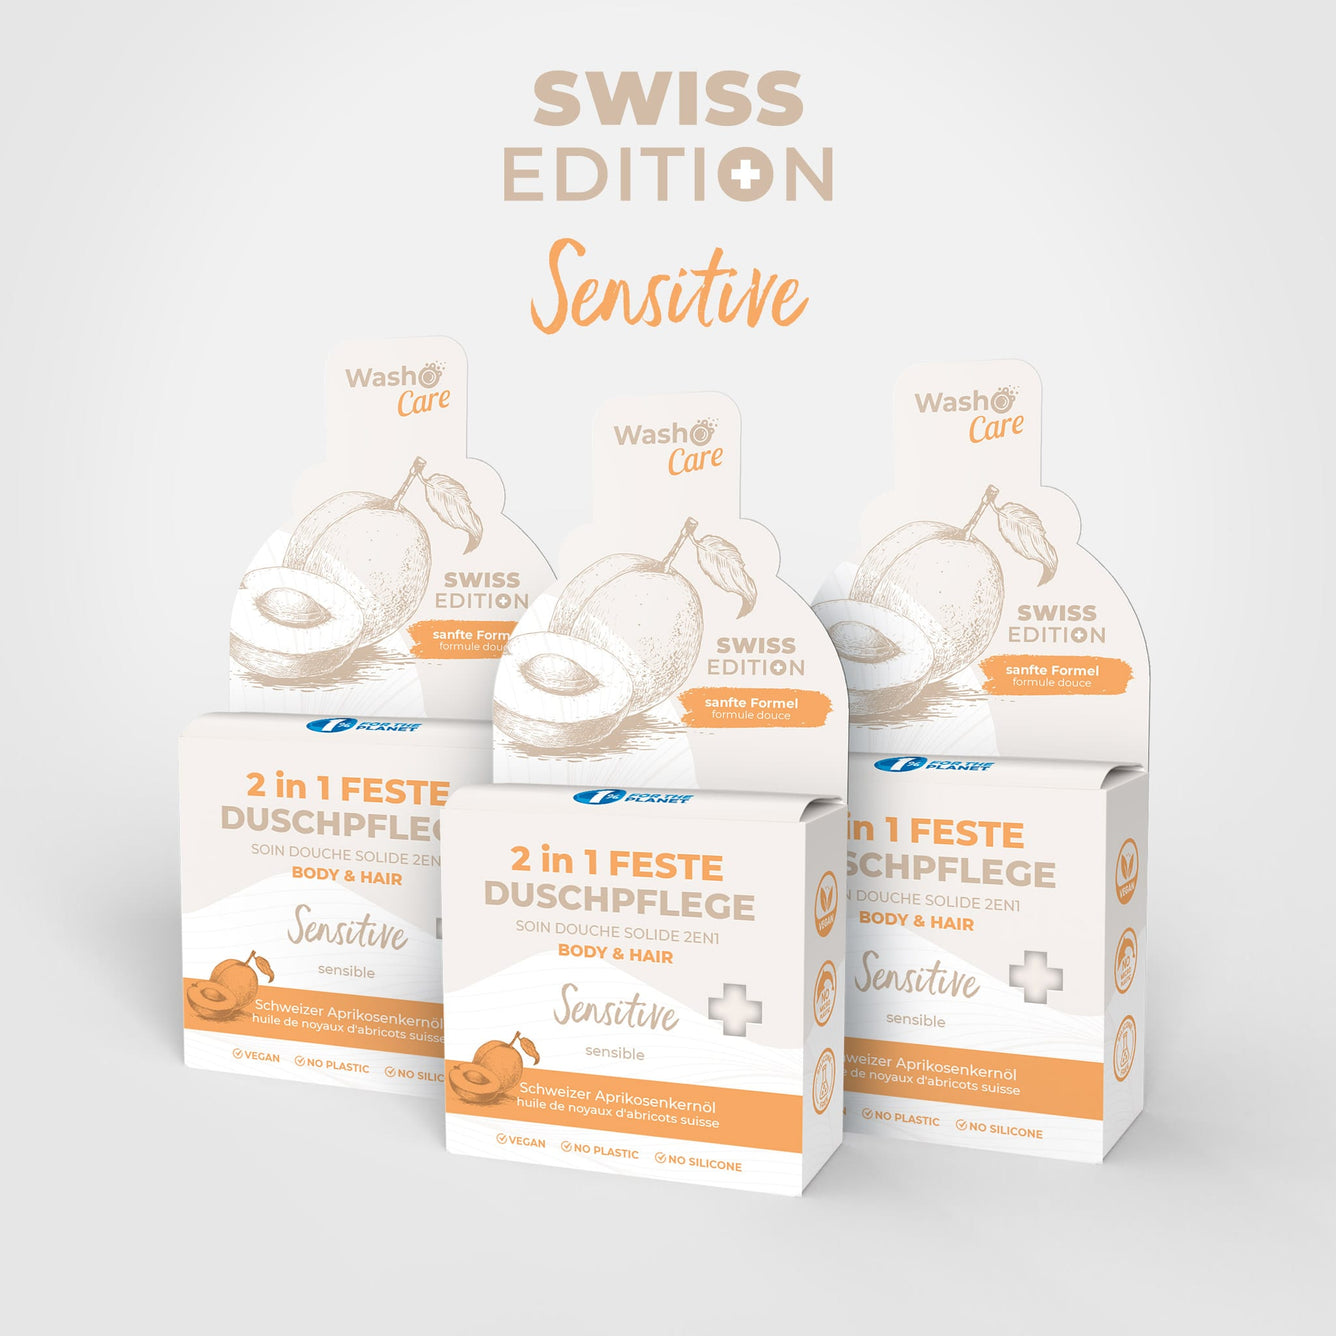 3 Washo Care Swiss Edition 2in1 Body & Hair Sensitive